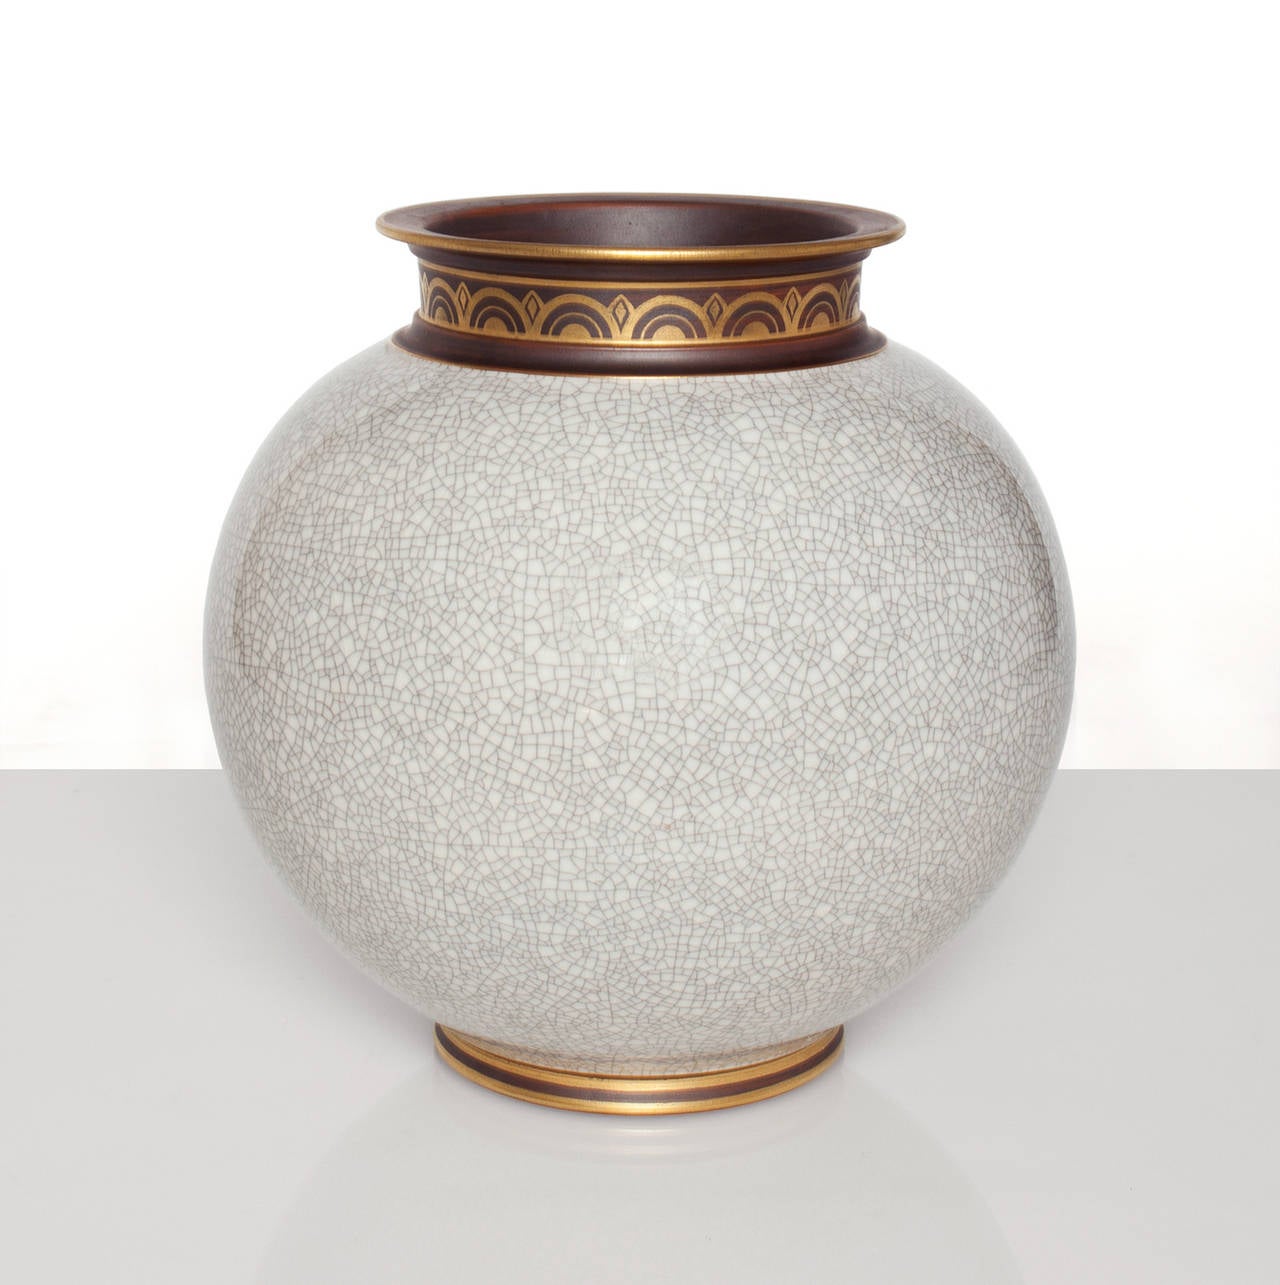 Large Swedish Art Deco vase designed by Gunnar Nylund for ALP (LIdkoping) body in white crackle glaze, foot and mouth in a brown glaze, both are detailed in gold. Signed. 10.5